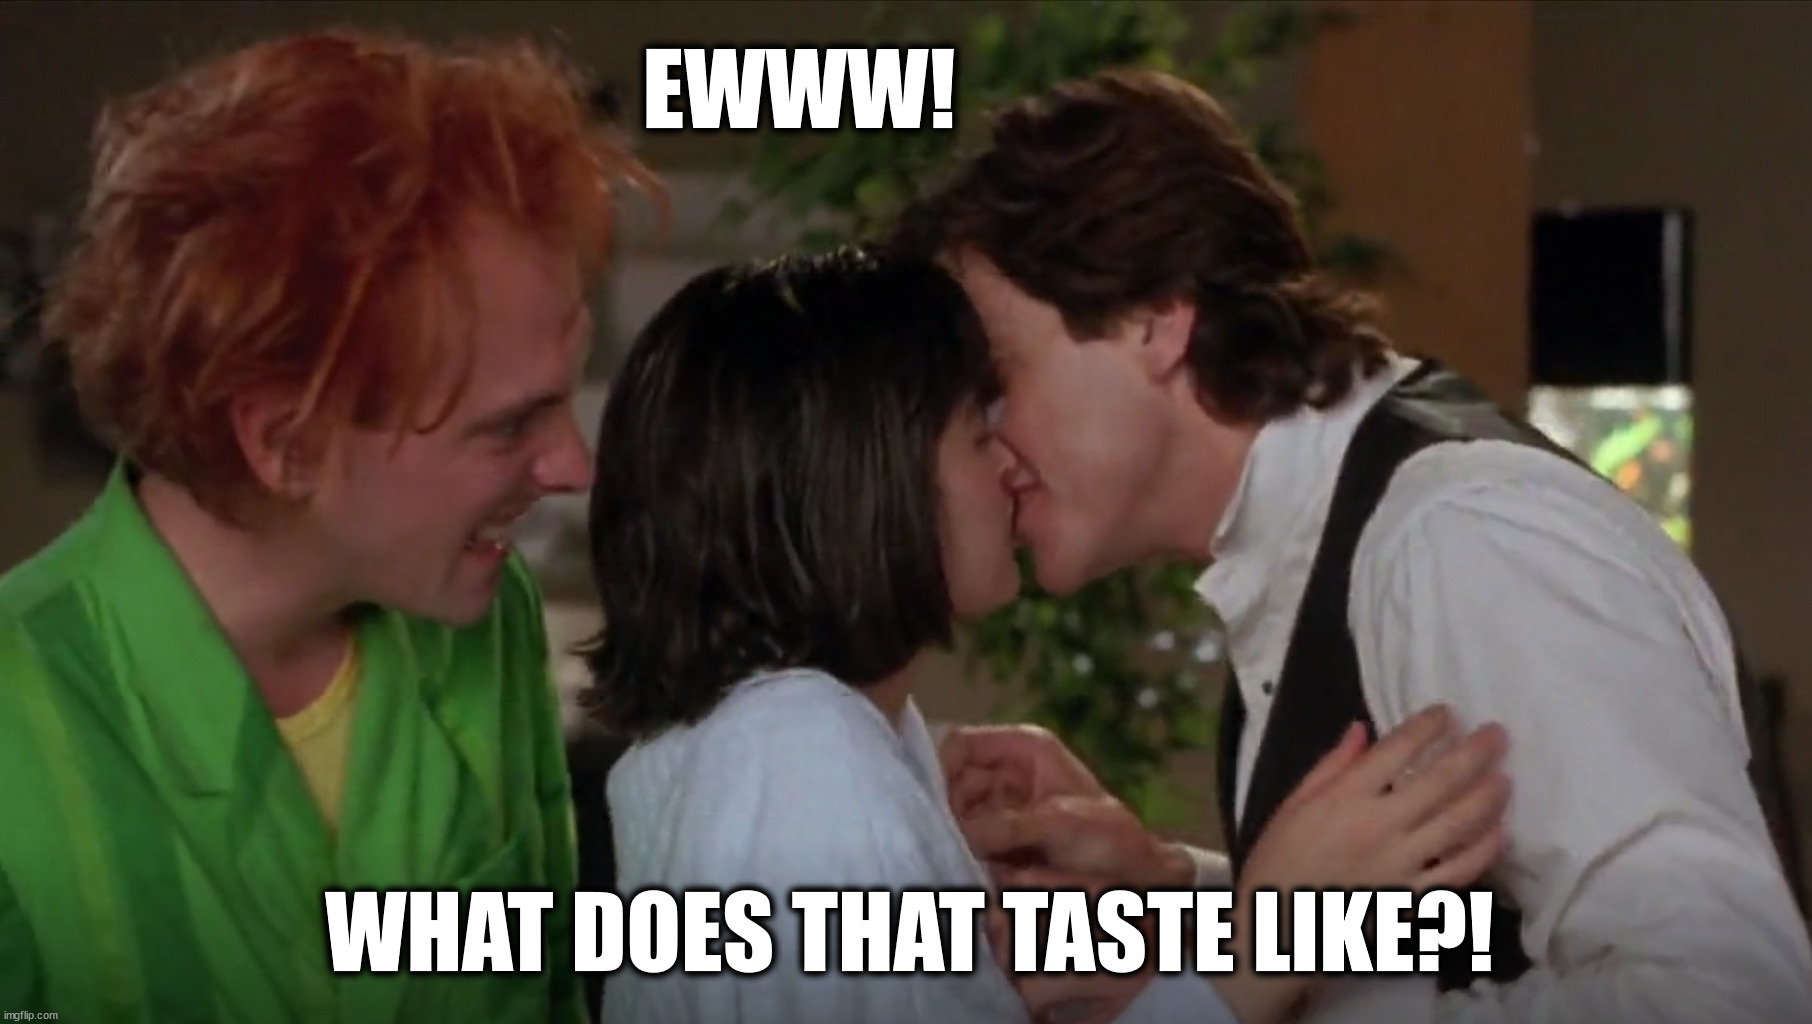 what does that taste like? | EWWW! WHAT DOES THAT TASTE LIKE?! | image tagged in drop dead fred,kissing,taste | made w/ Imgflip meme maker